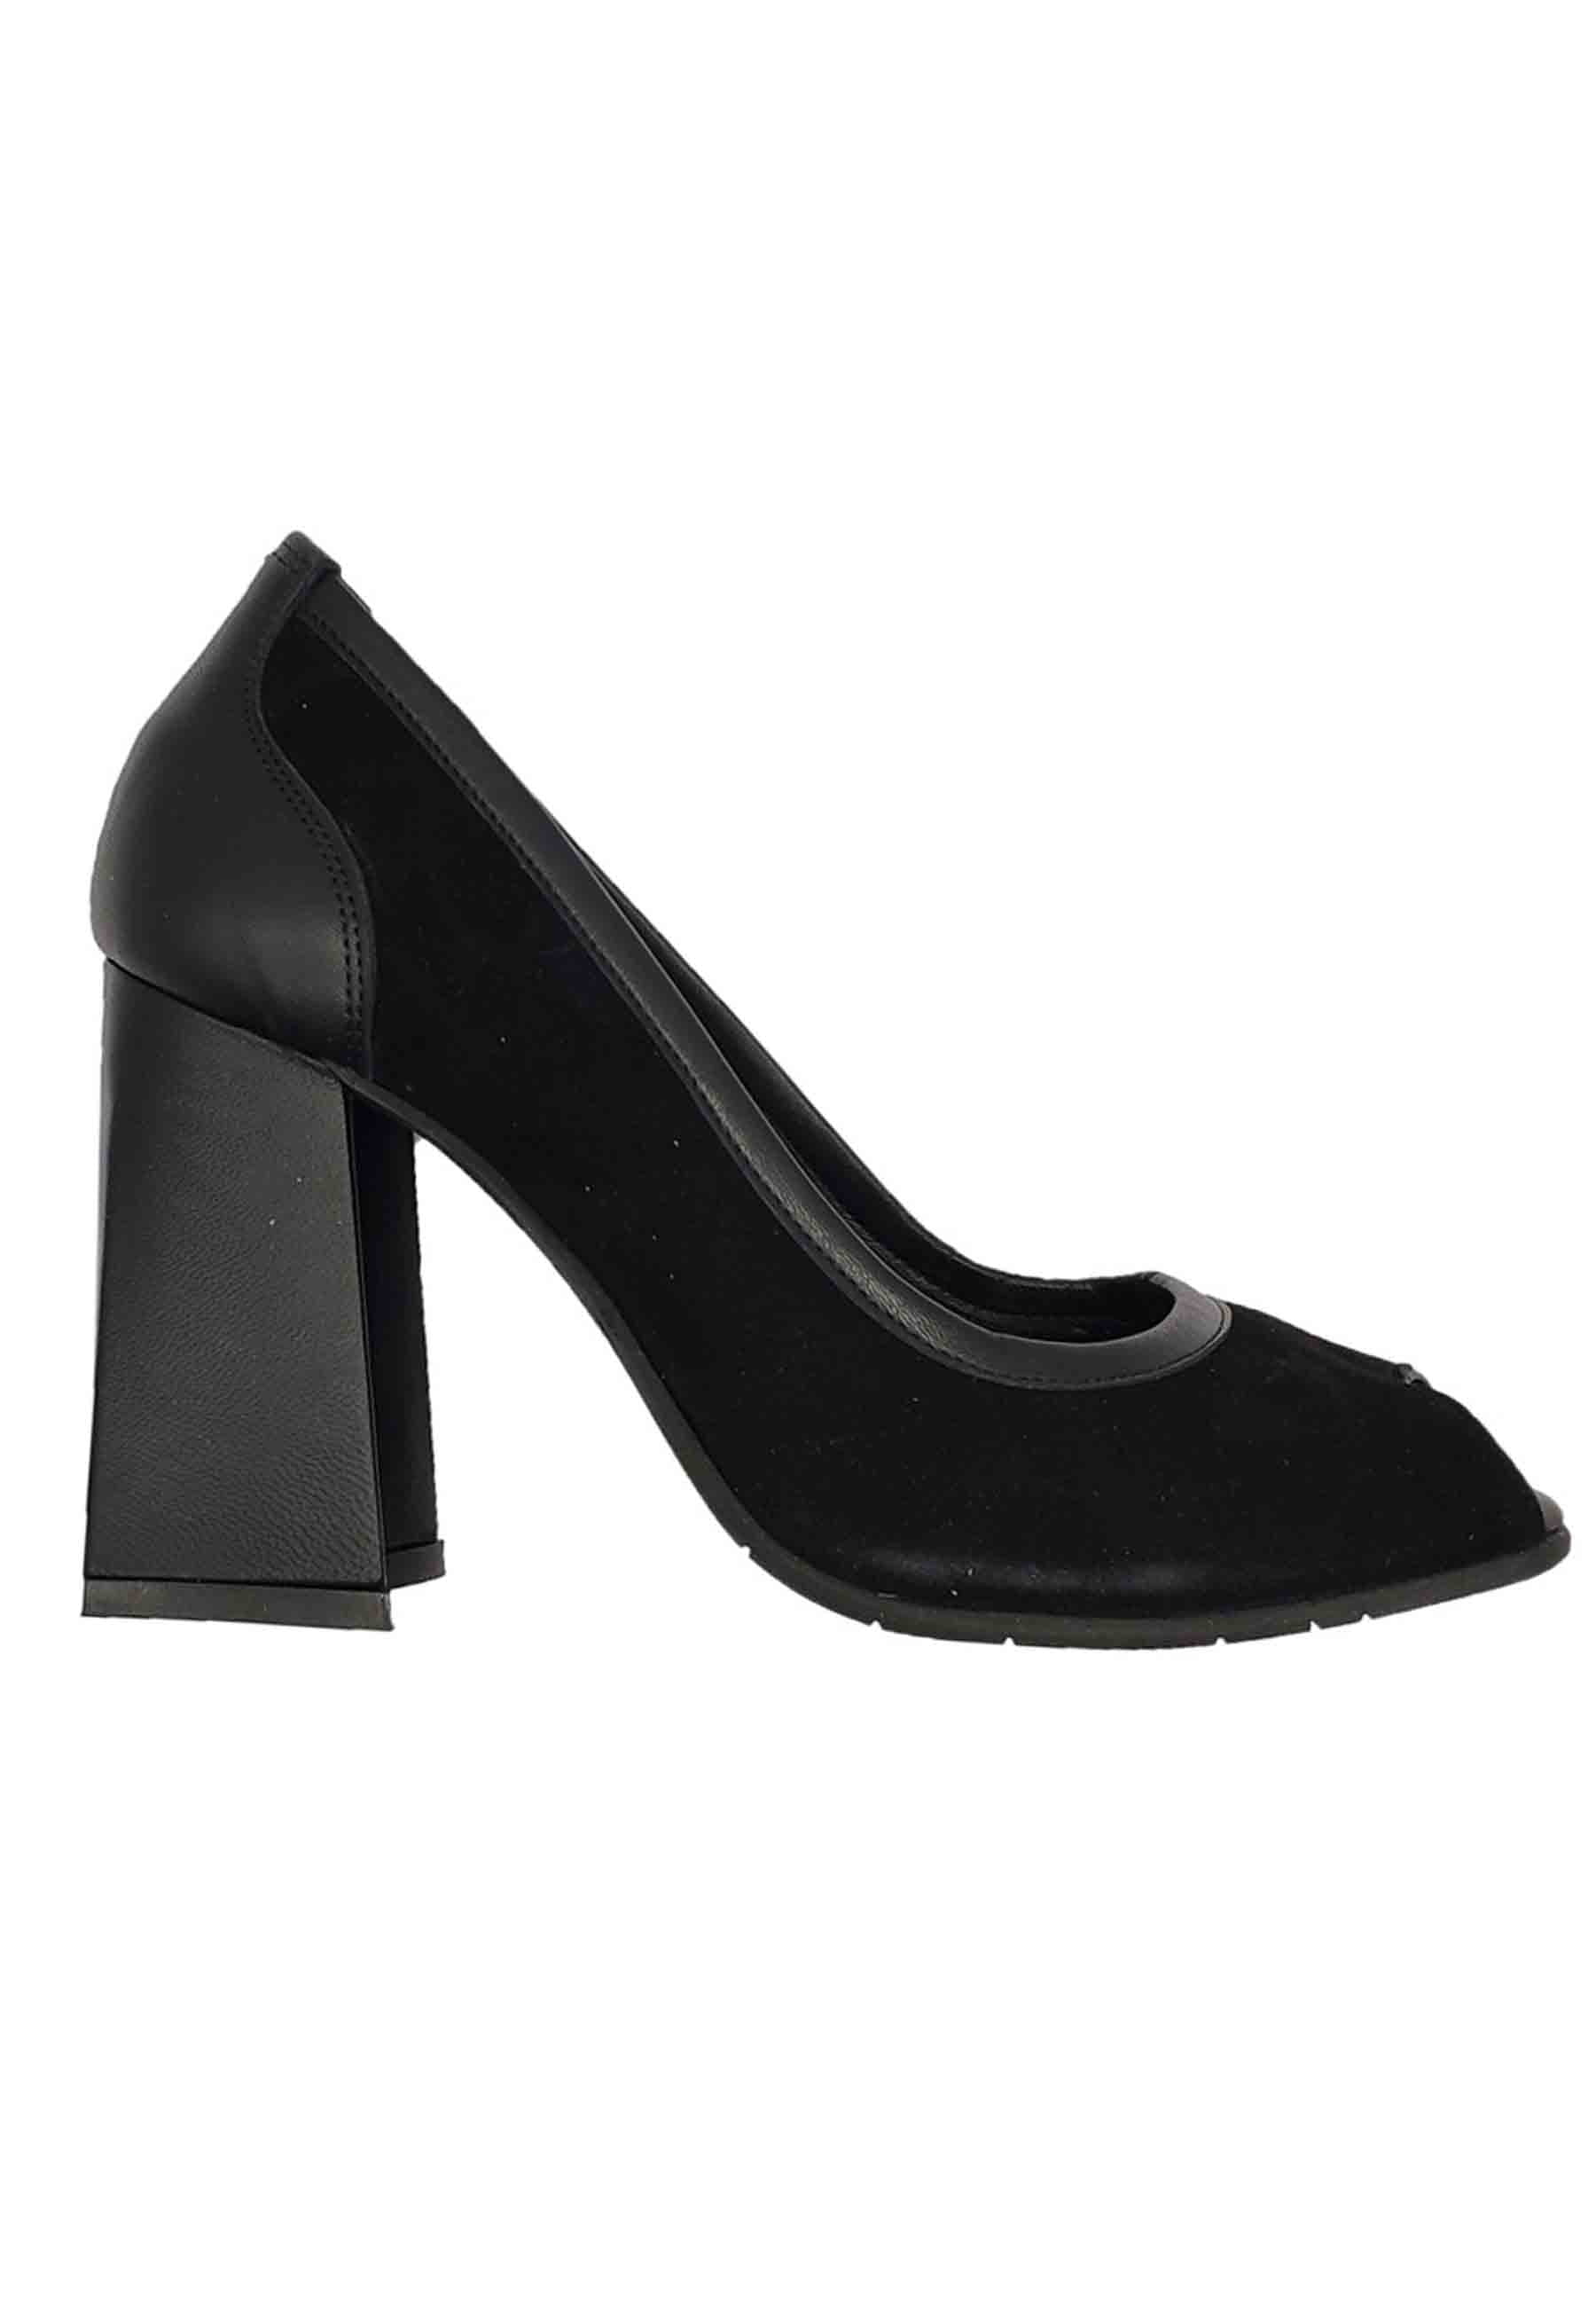 Women's Shoes Open Toe Décolleté In Black Suede And Leather High Heel